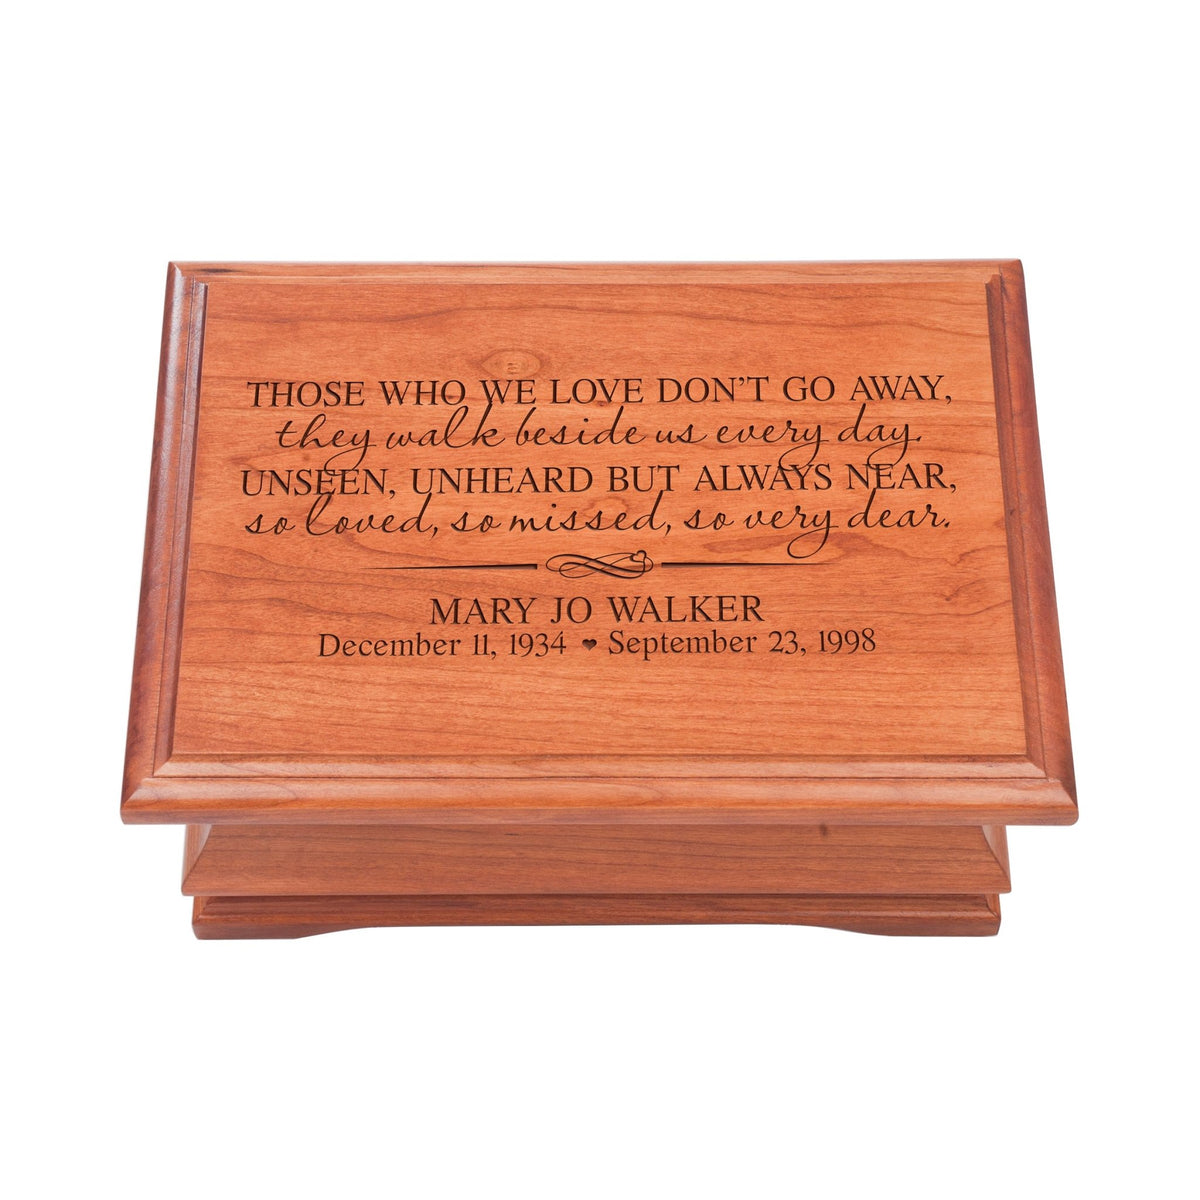 Personalized Memorial Jewelry Box – Those Who We Love - LifeSong Milestones